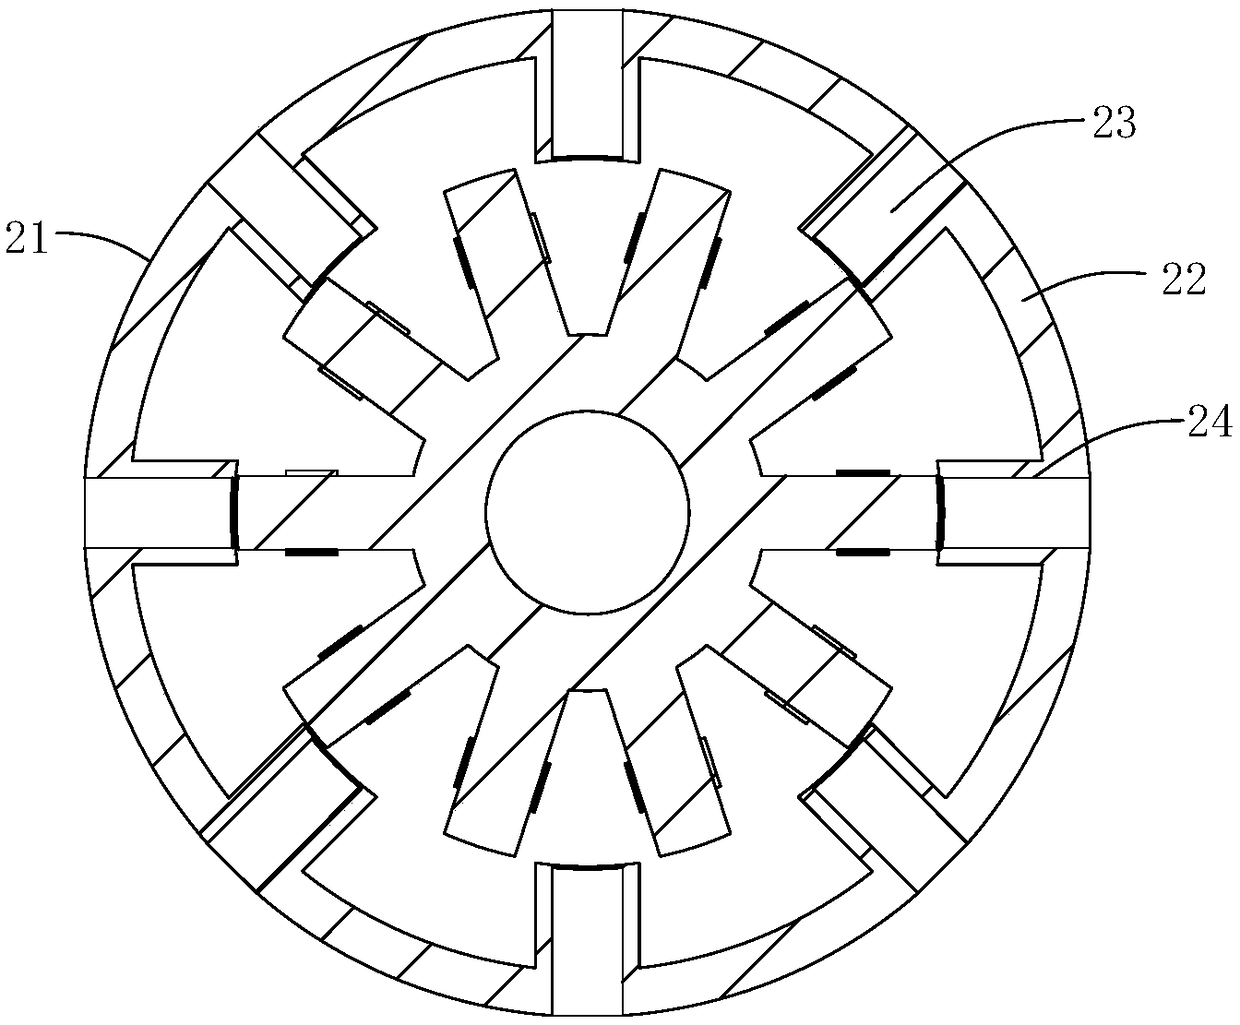 Centrifugal variable flux permanent magnet synchronous motor